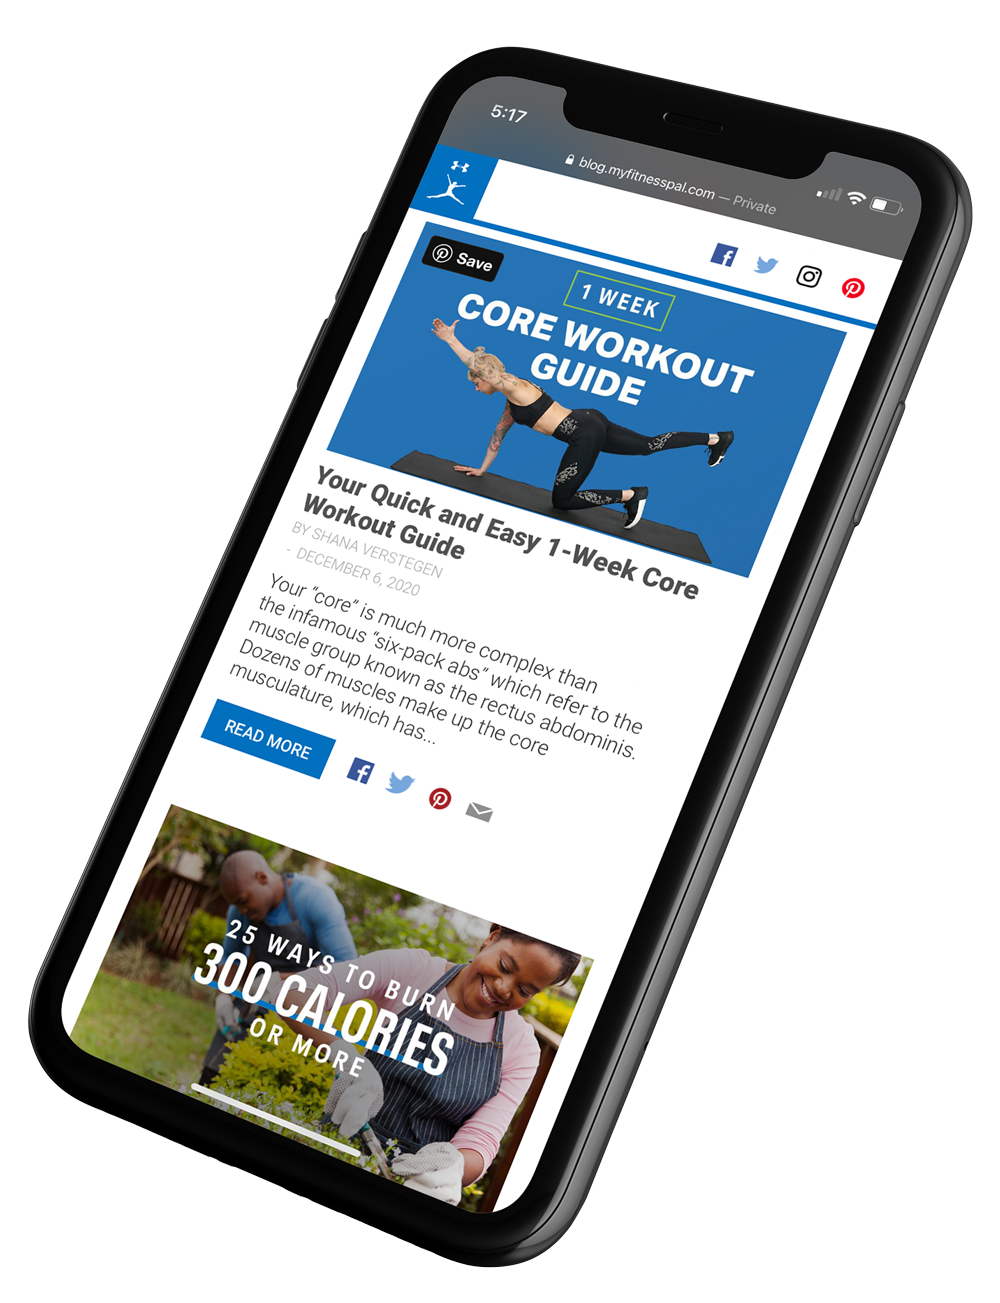 Mobile- Leverage the HMN mobile network to reach your target audience in the waiting room and beyond to increase brand awareness and engagement with your POC campaign.